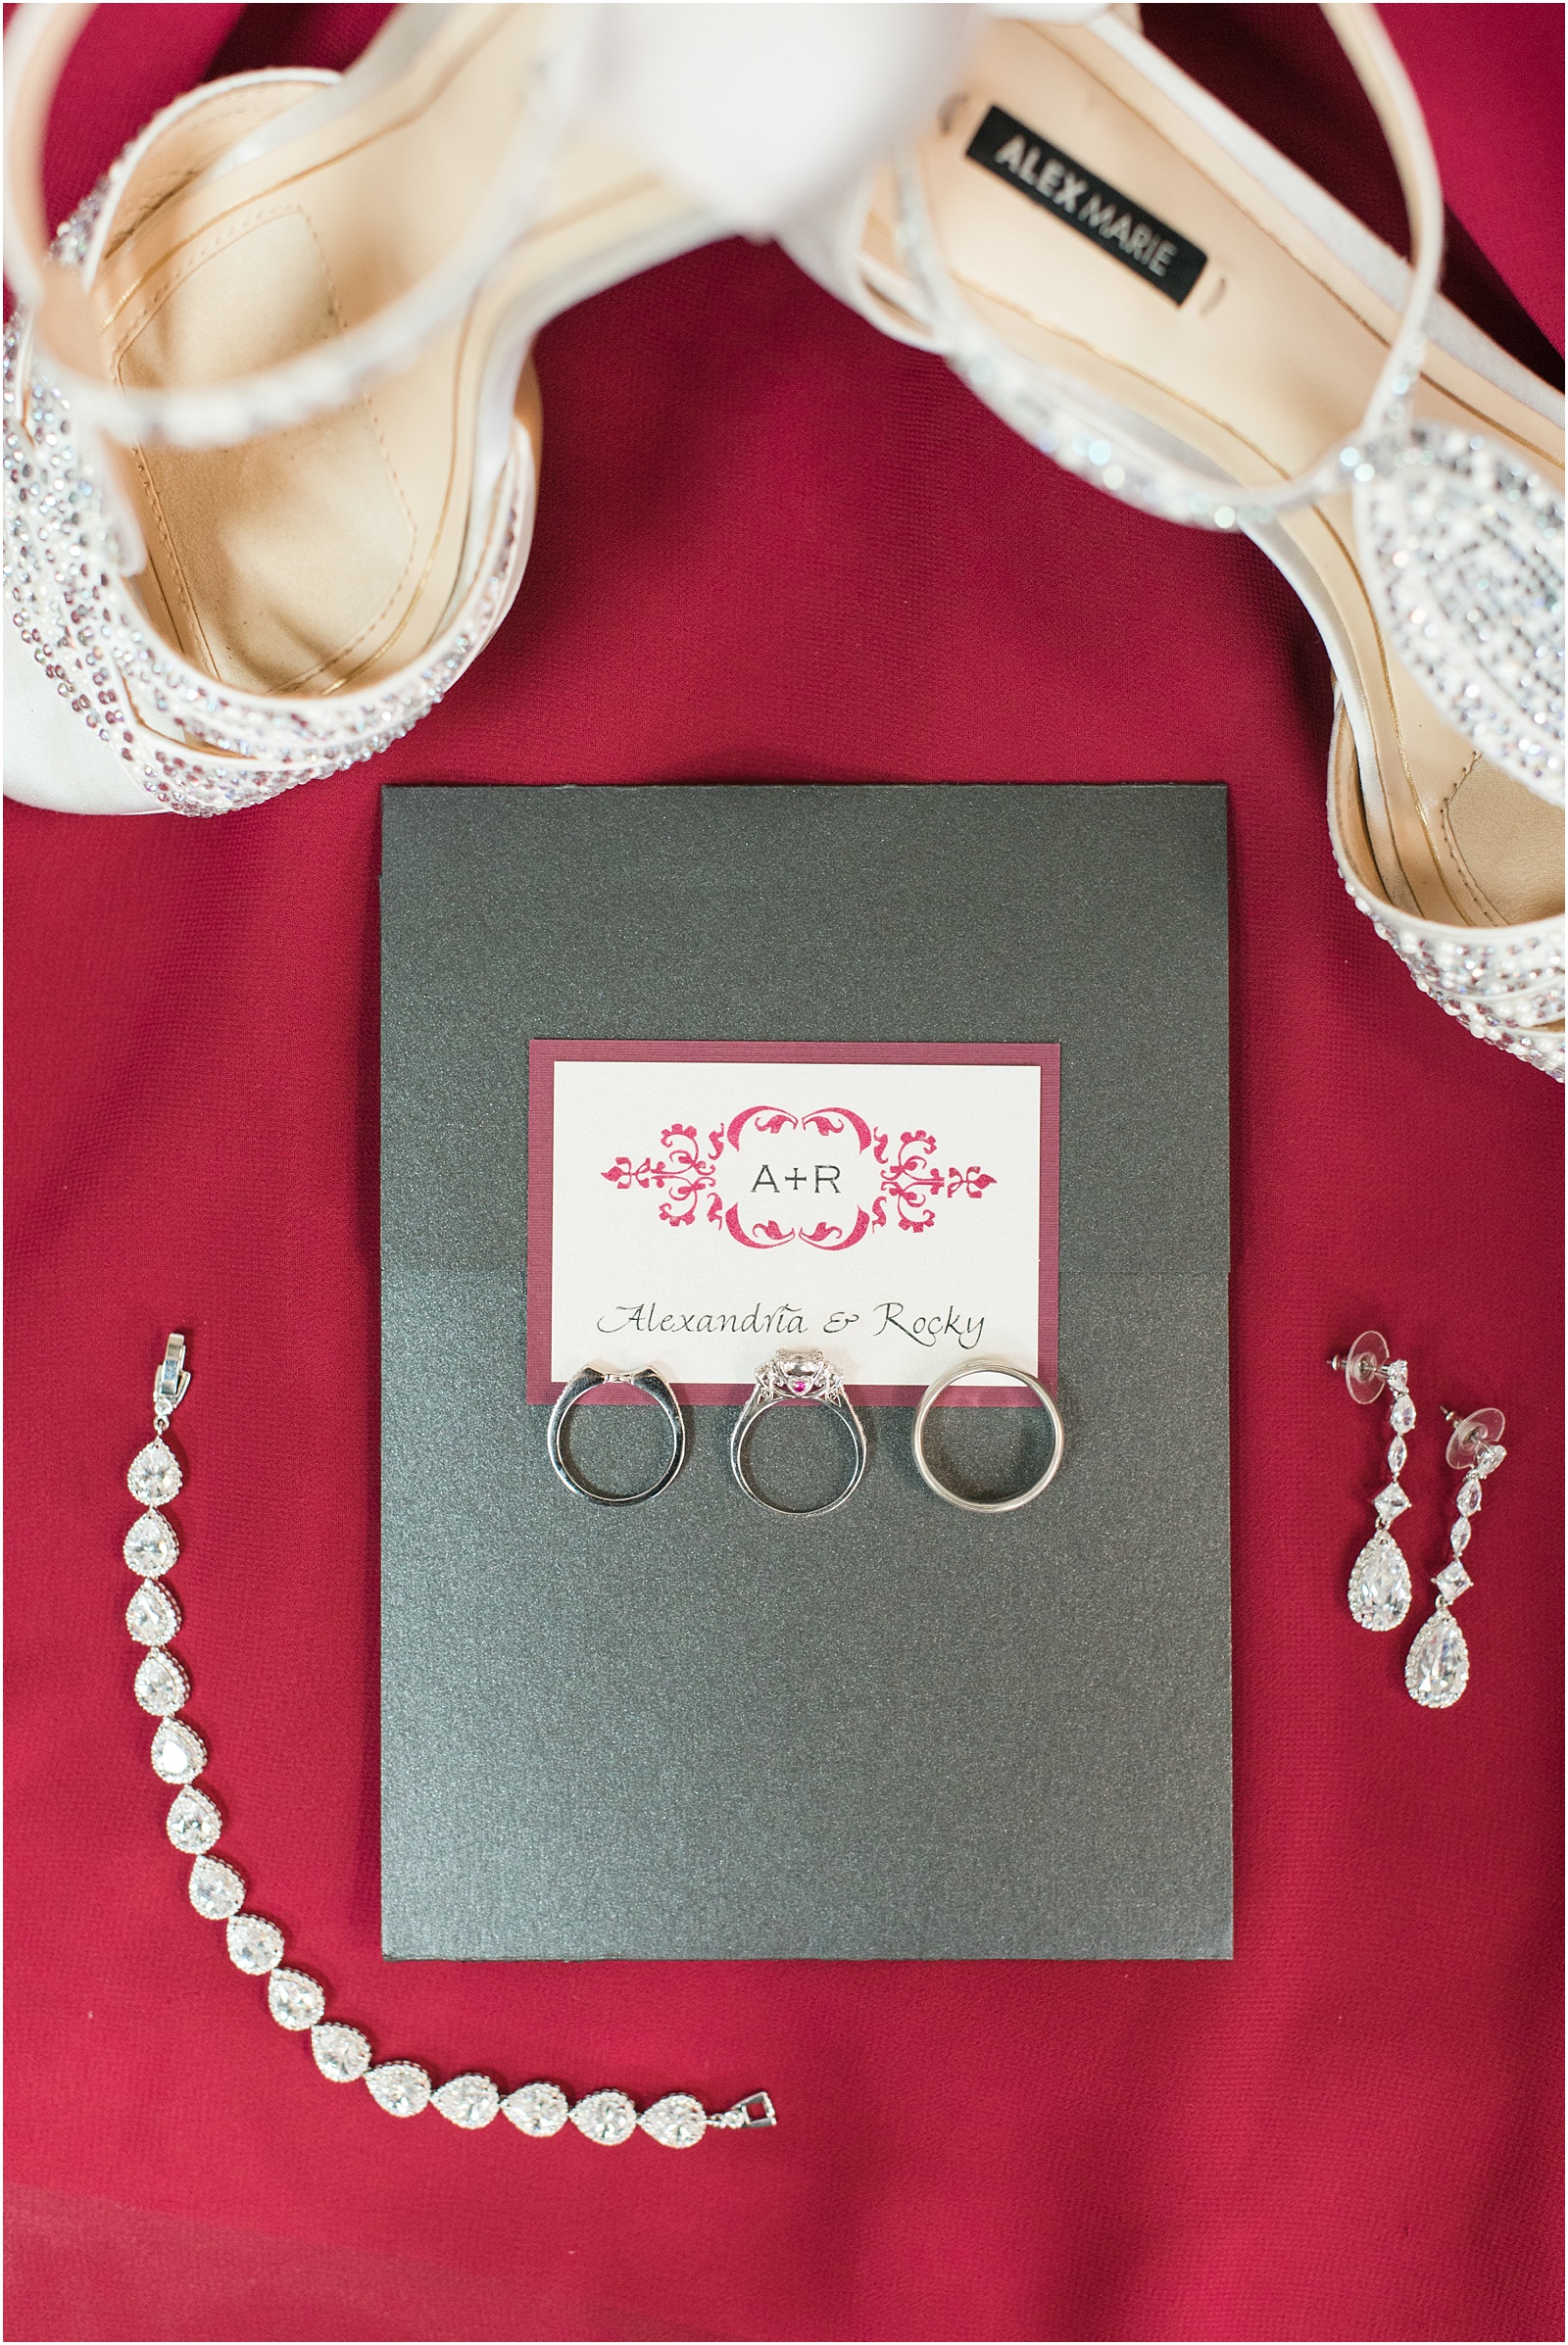 Wedding jewelry, shoes and invitations